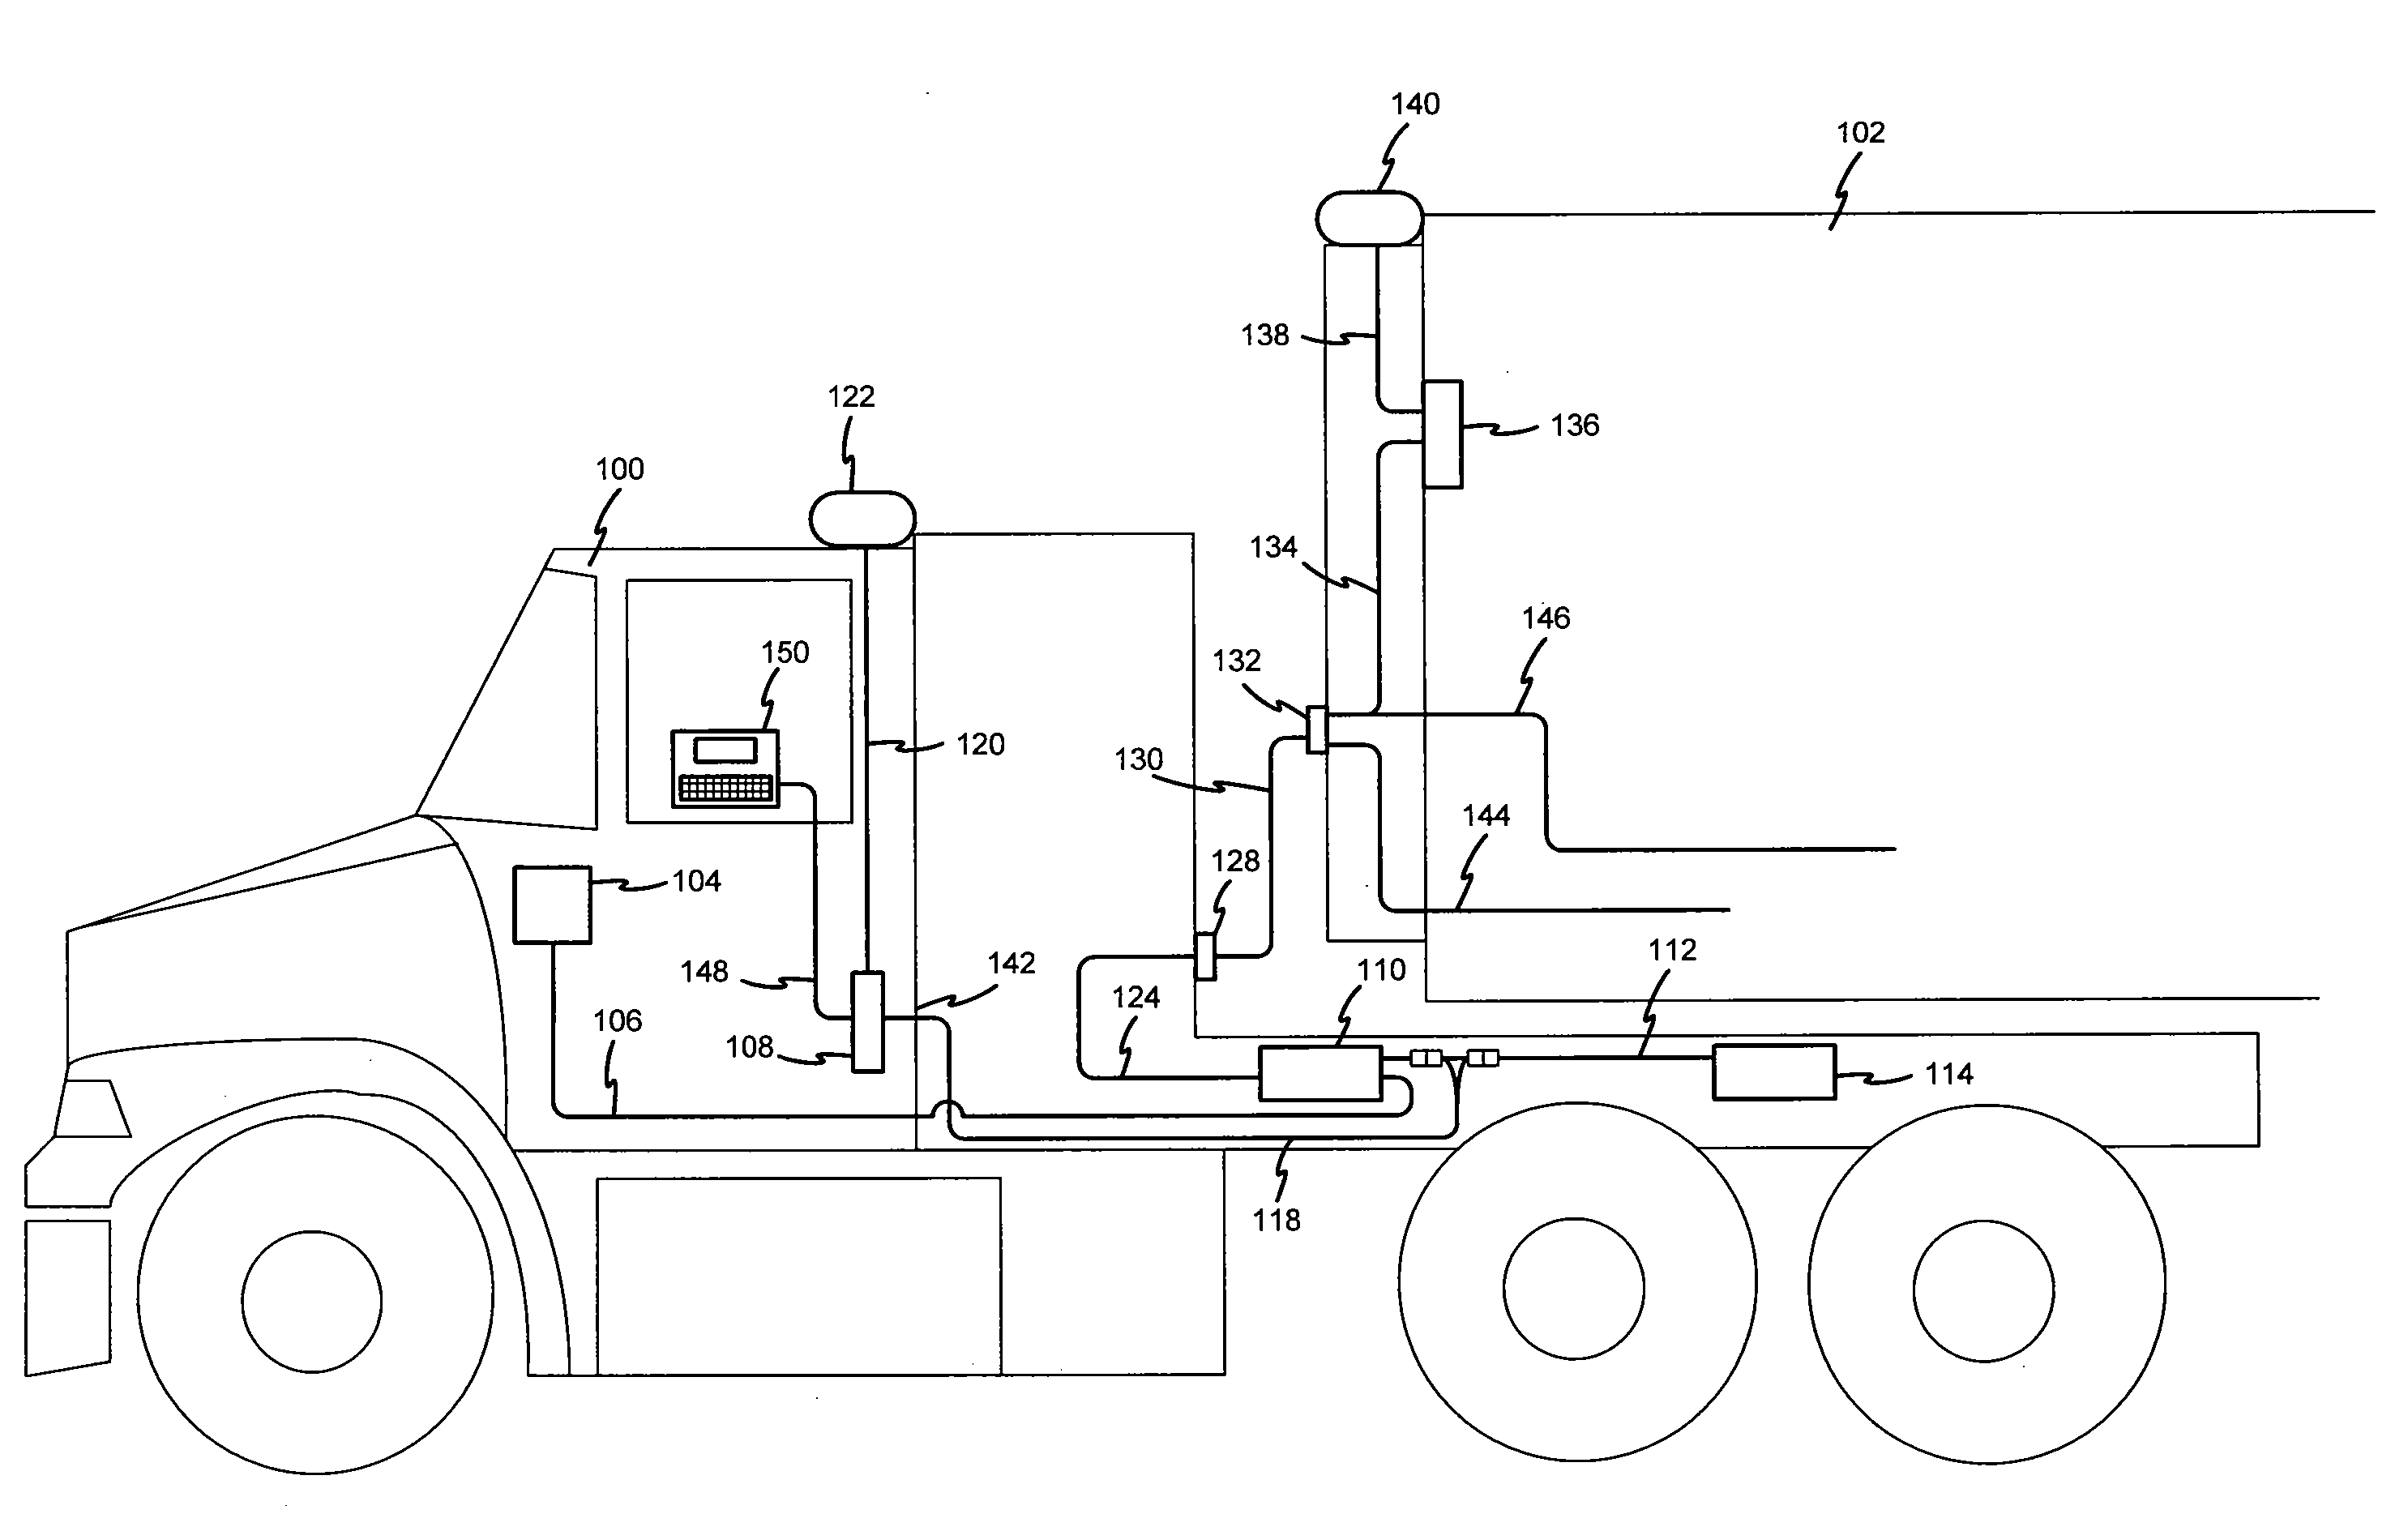 System, method and device for retrofitting tractor-trailer communications systems